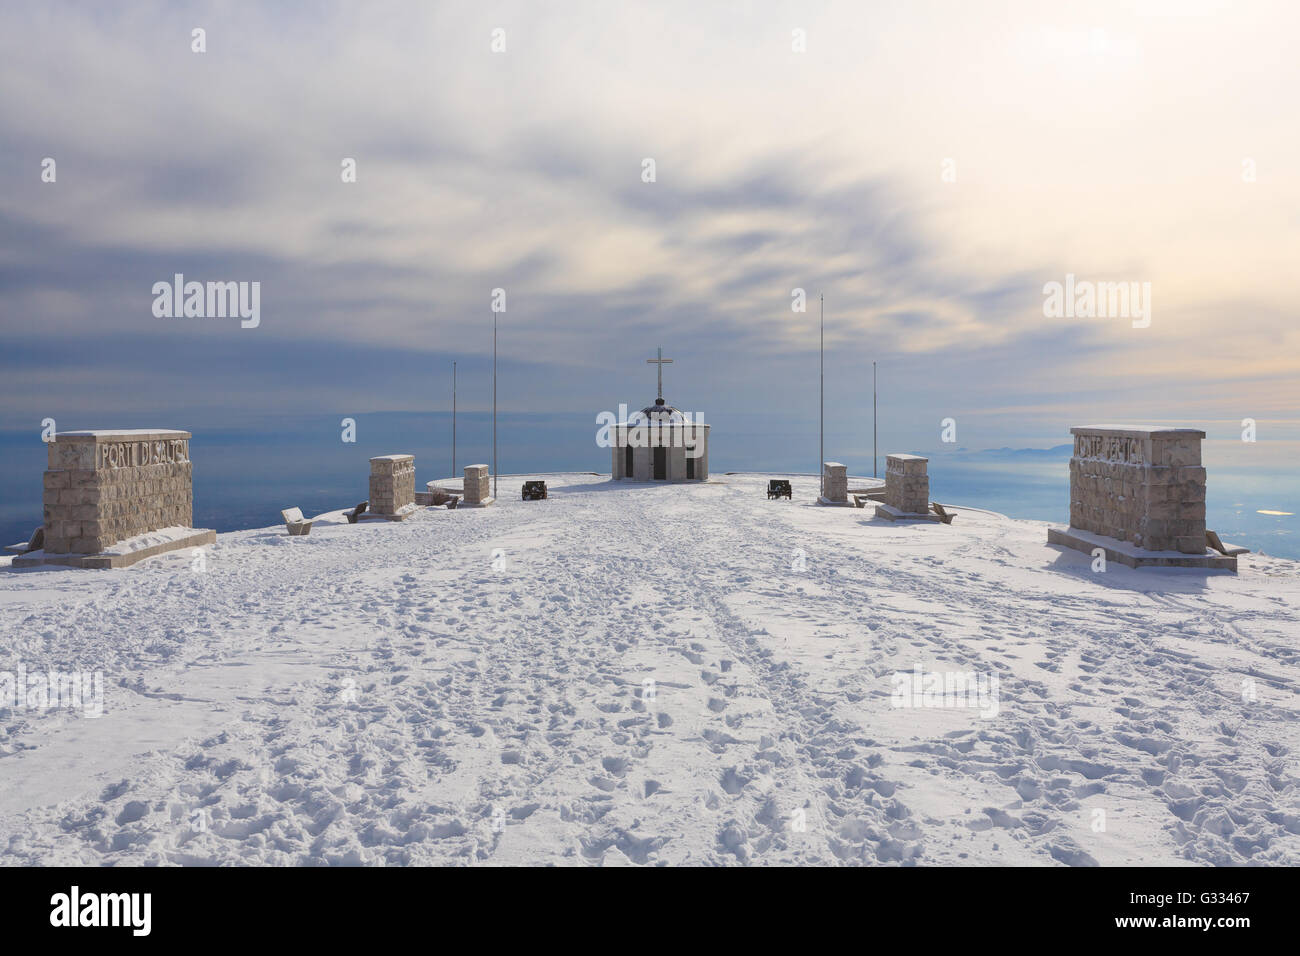 Winter panorama from Italian Alps. First world war memorial building. Snow Stock Photo